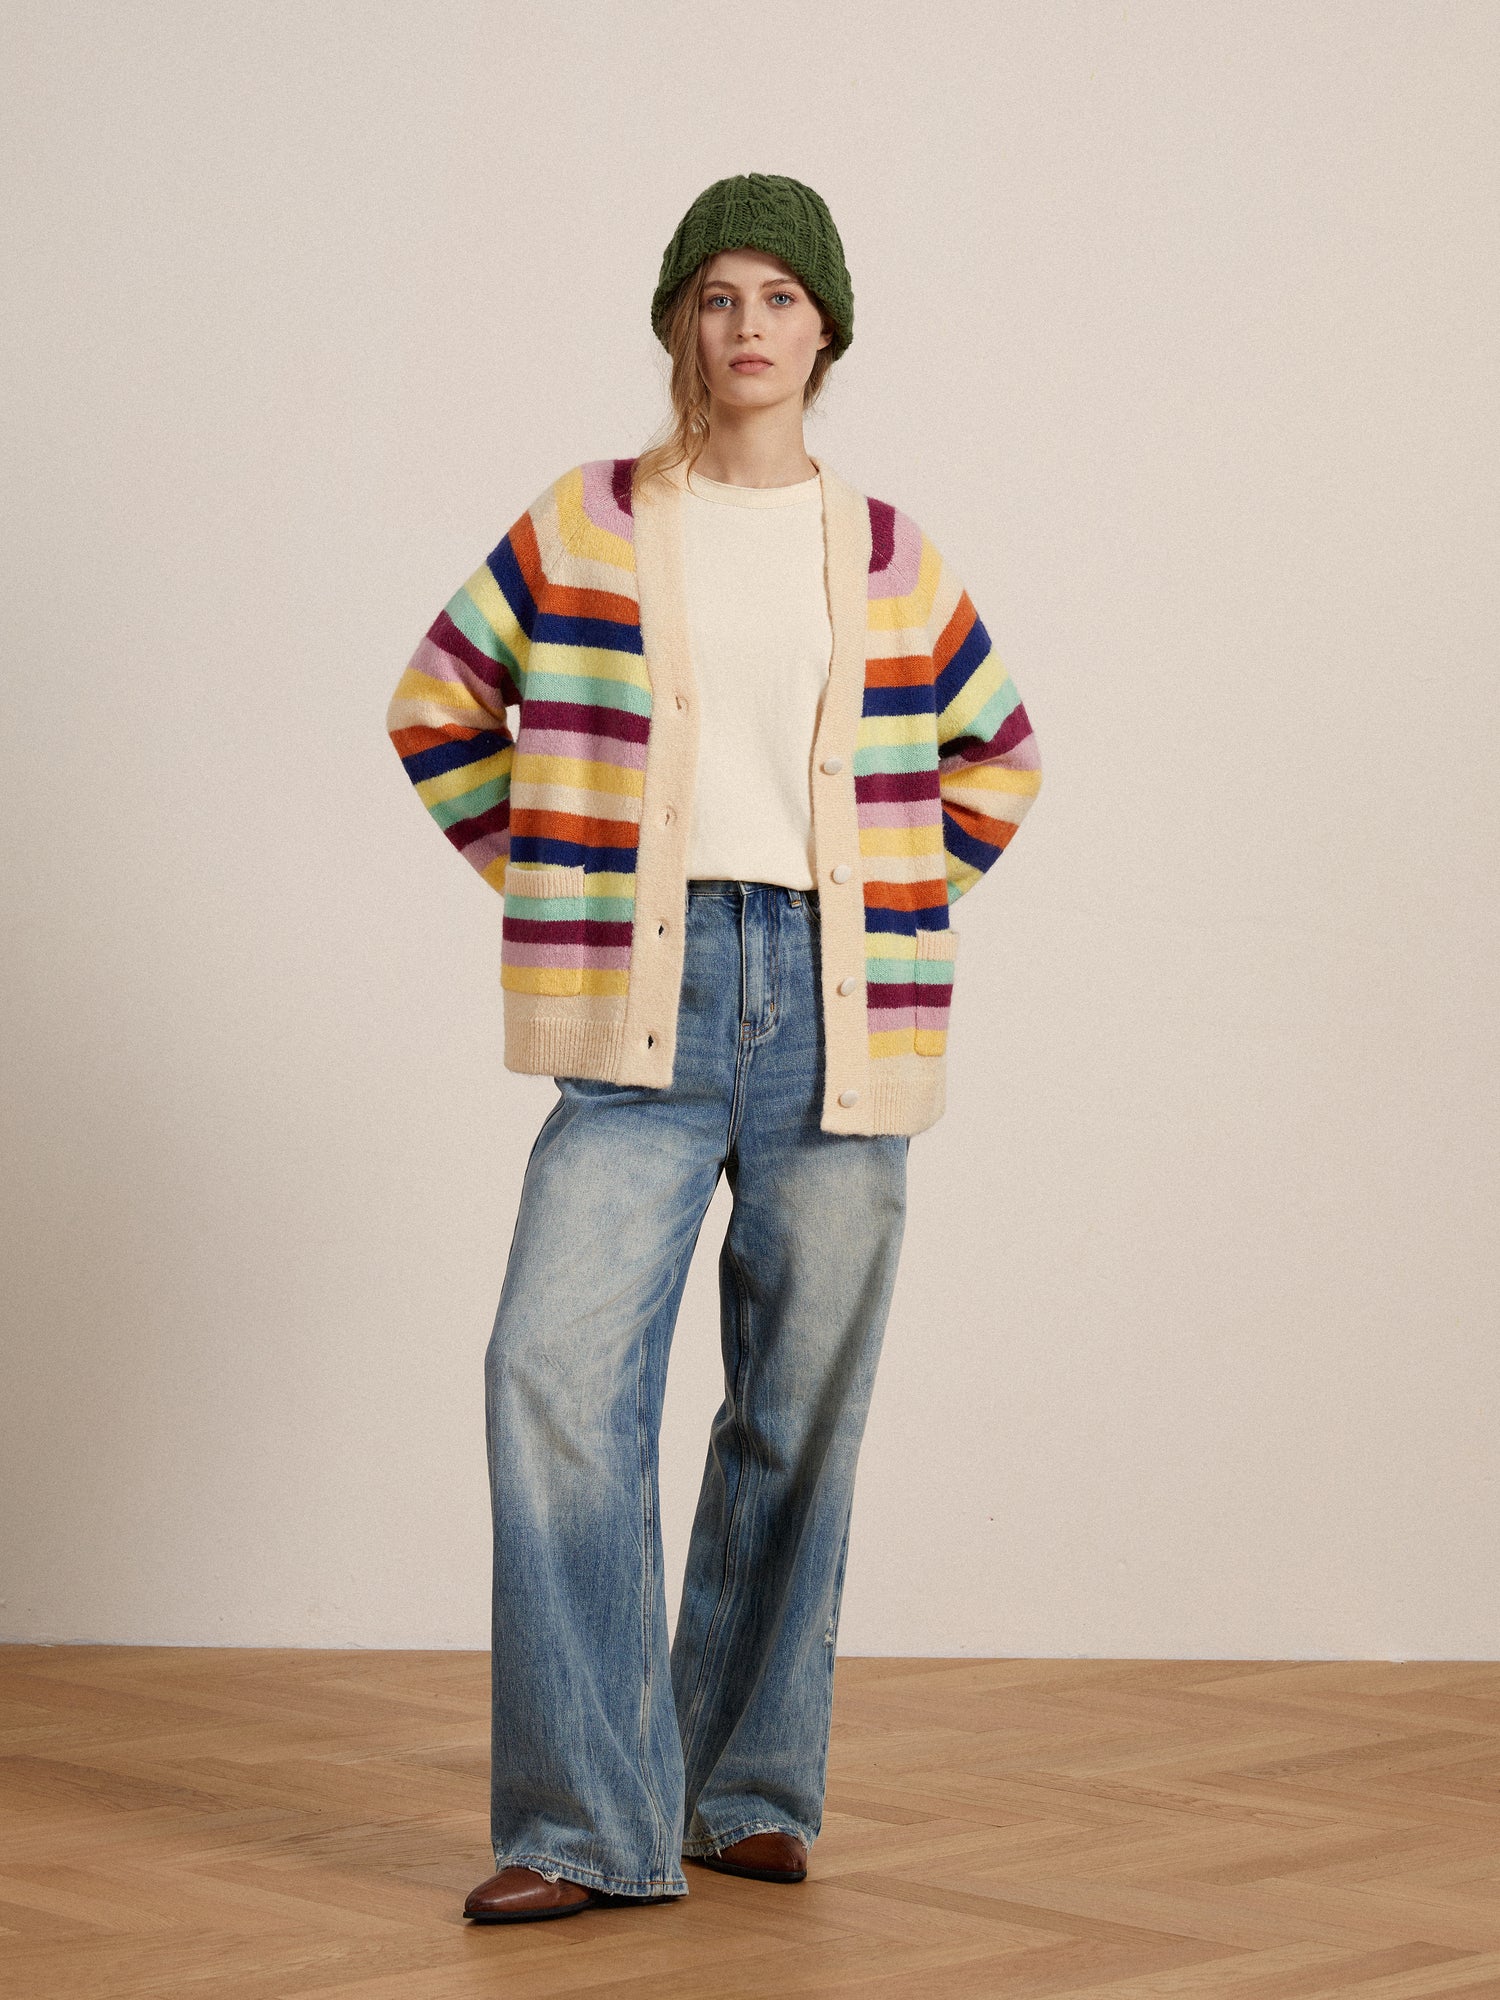 A woman wearing a vibrant hues Found Razi Multi Stripe Cardigan and jeans.